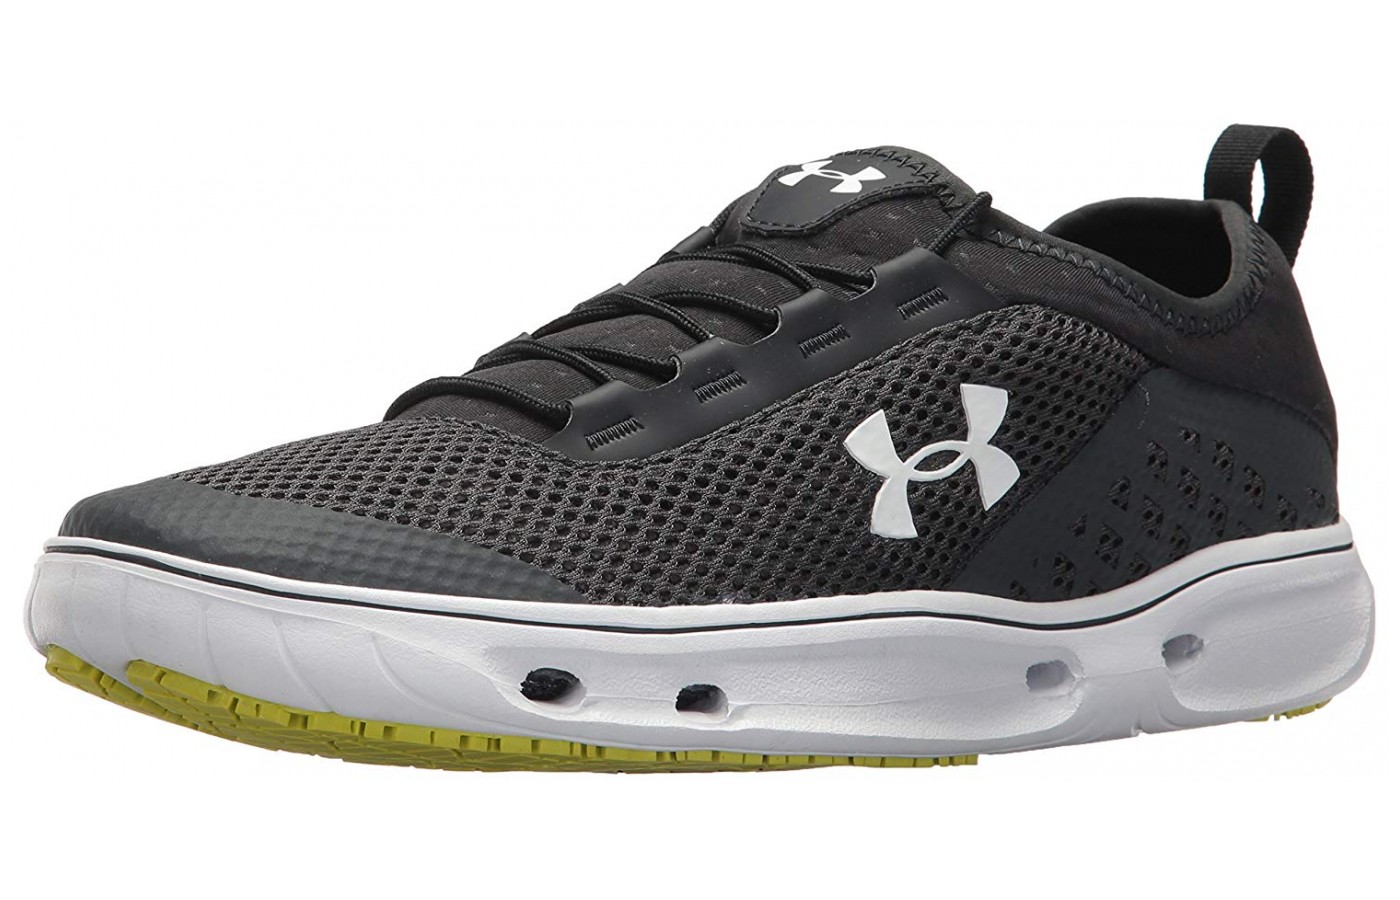 Under Armour Kilchis: To Buy or Not in 